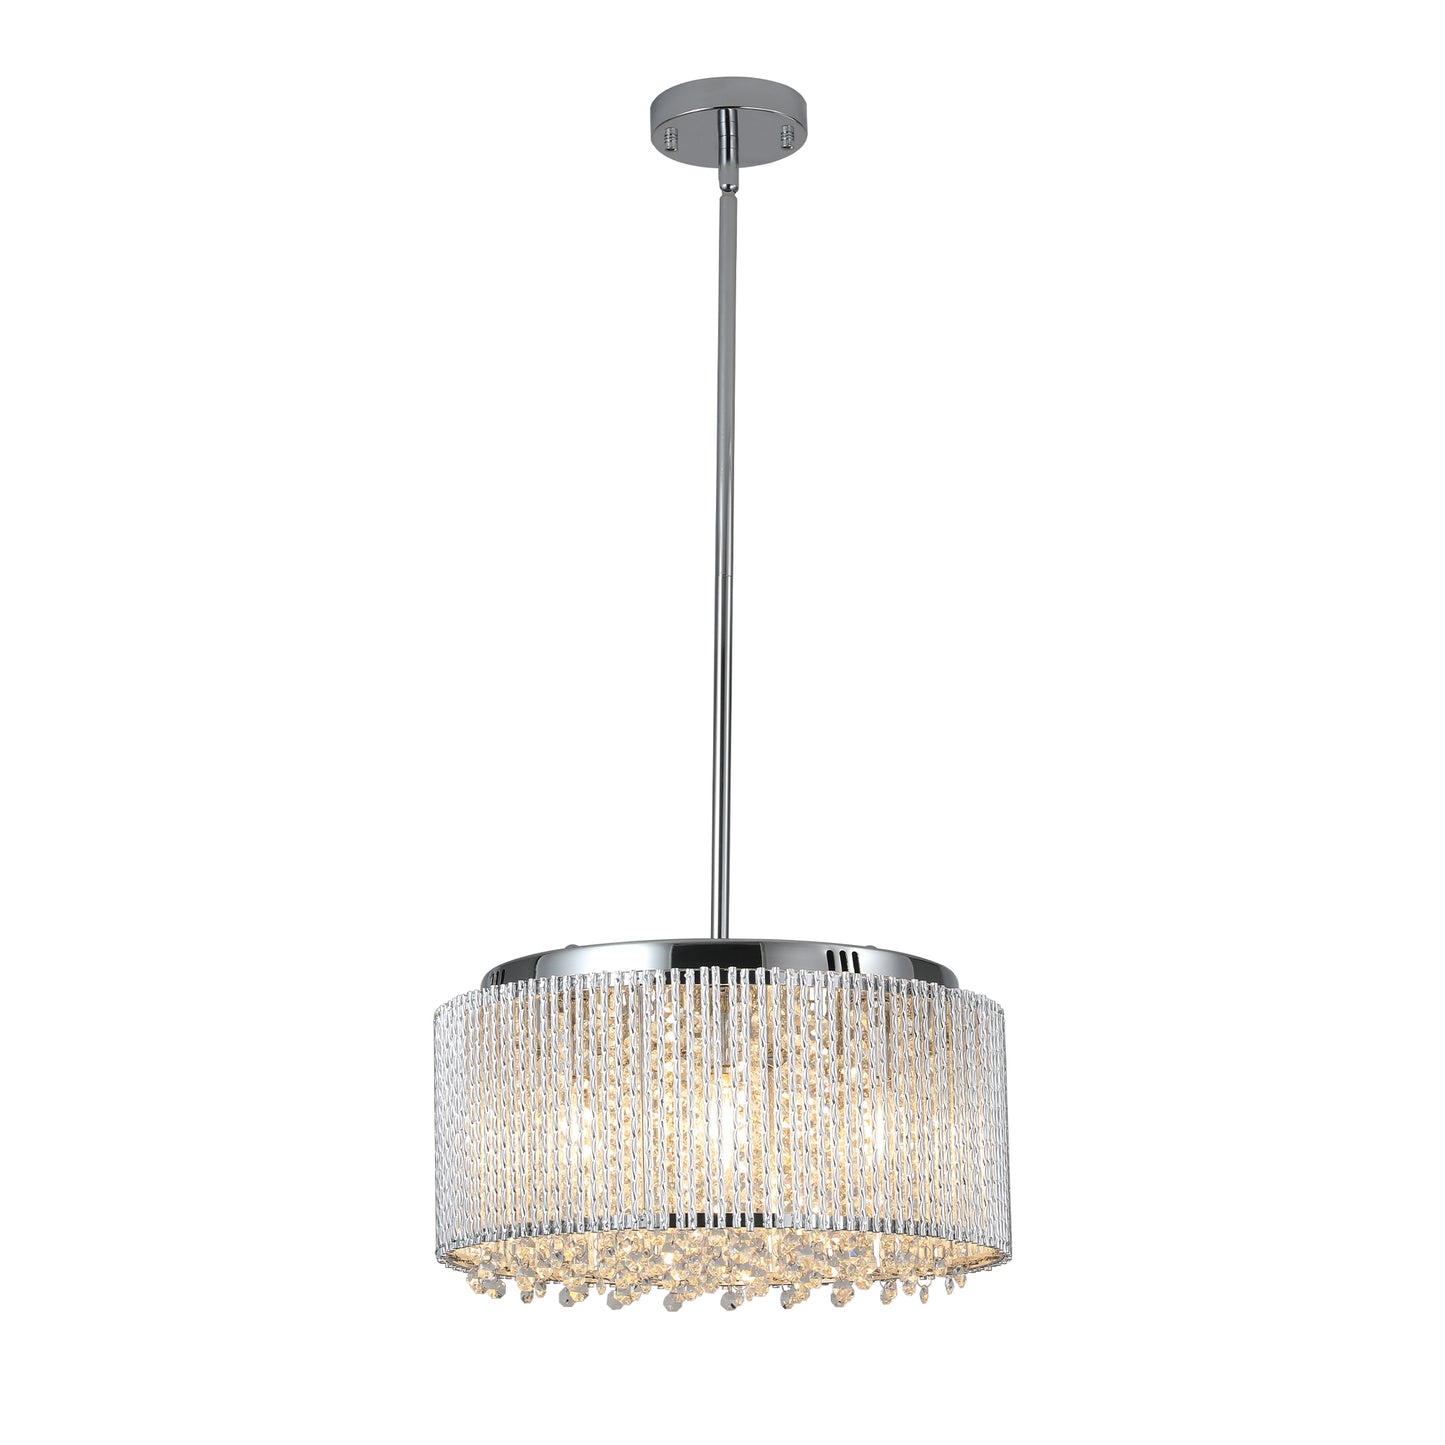 Modern Crystal Chandelier for Living-Room Round Cristal Lamp Luxury Home Decor Light Fixture